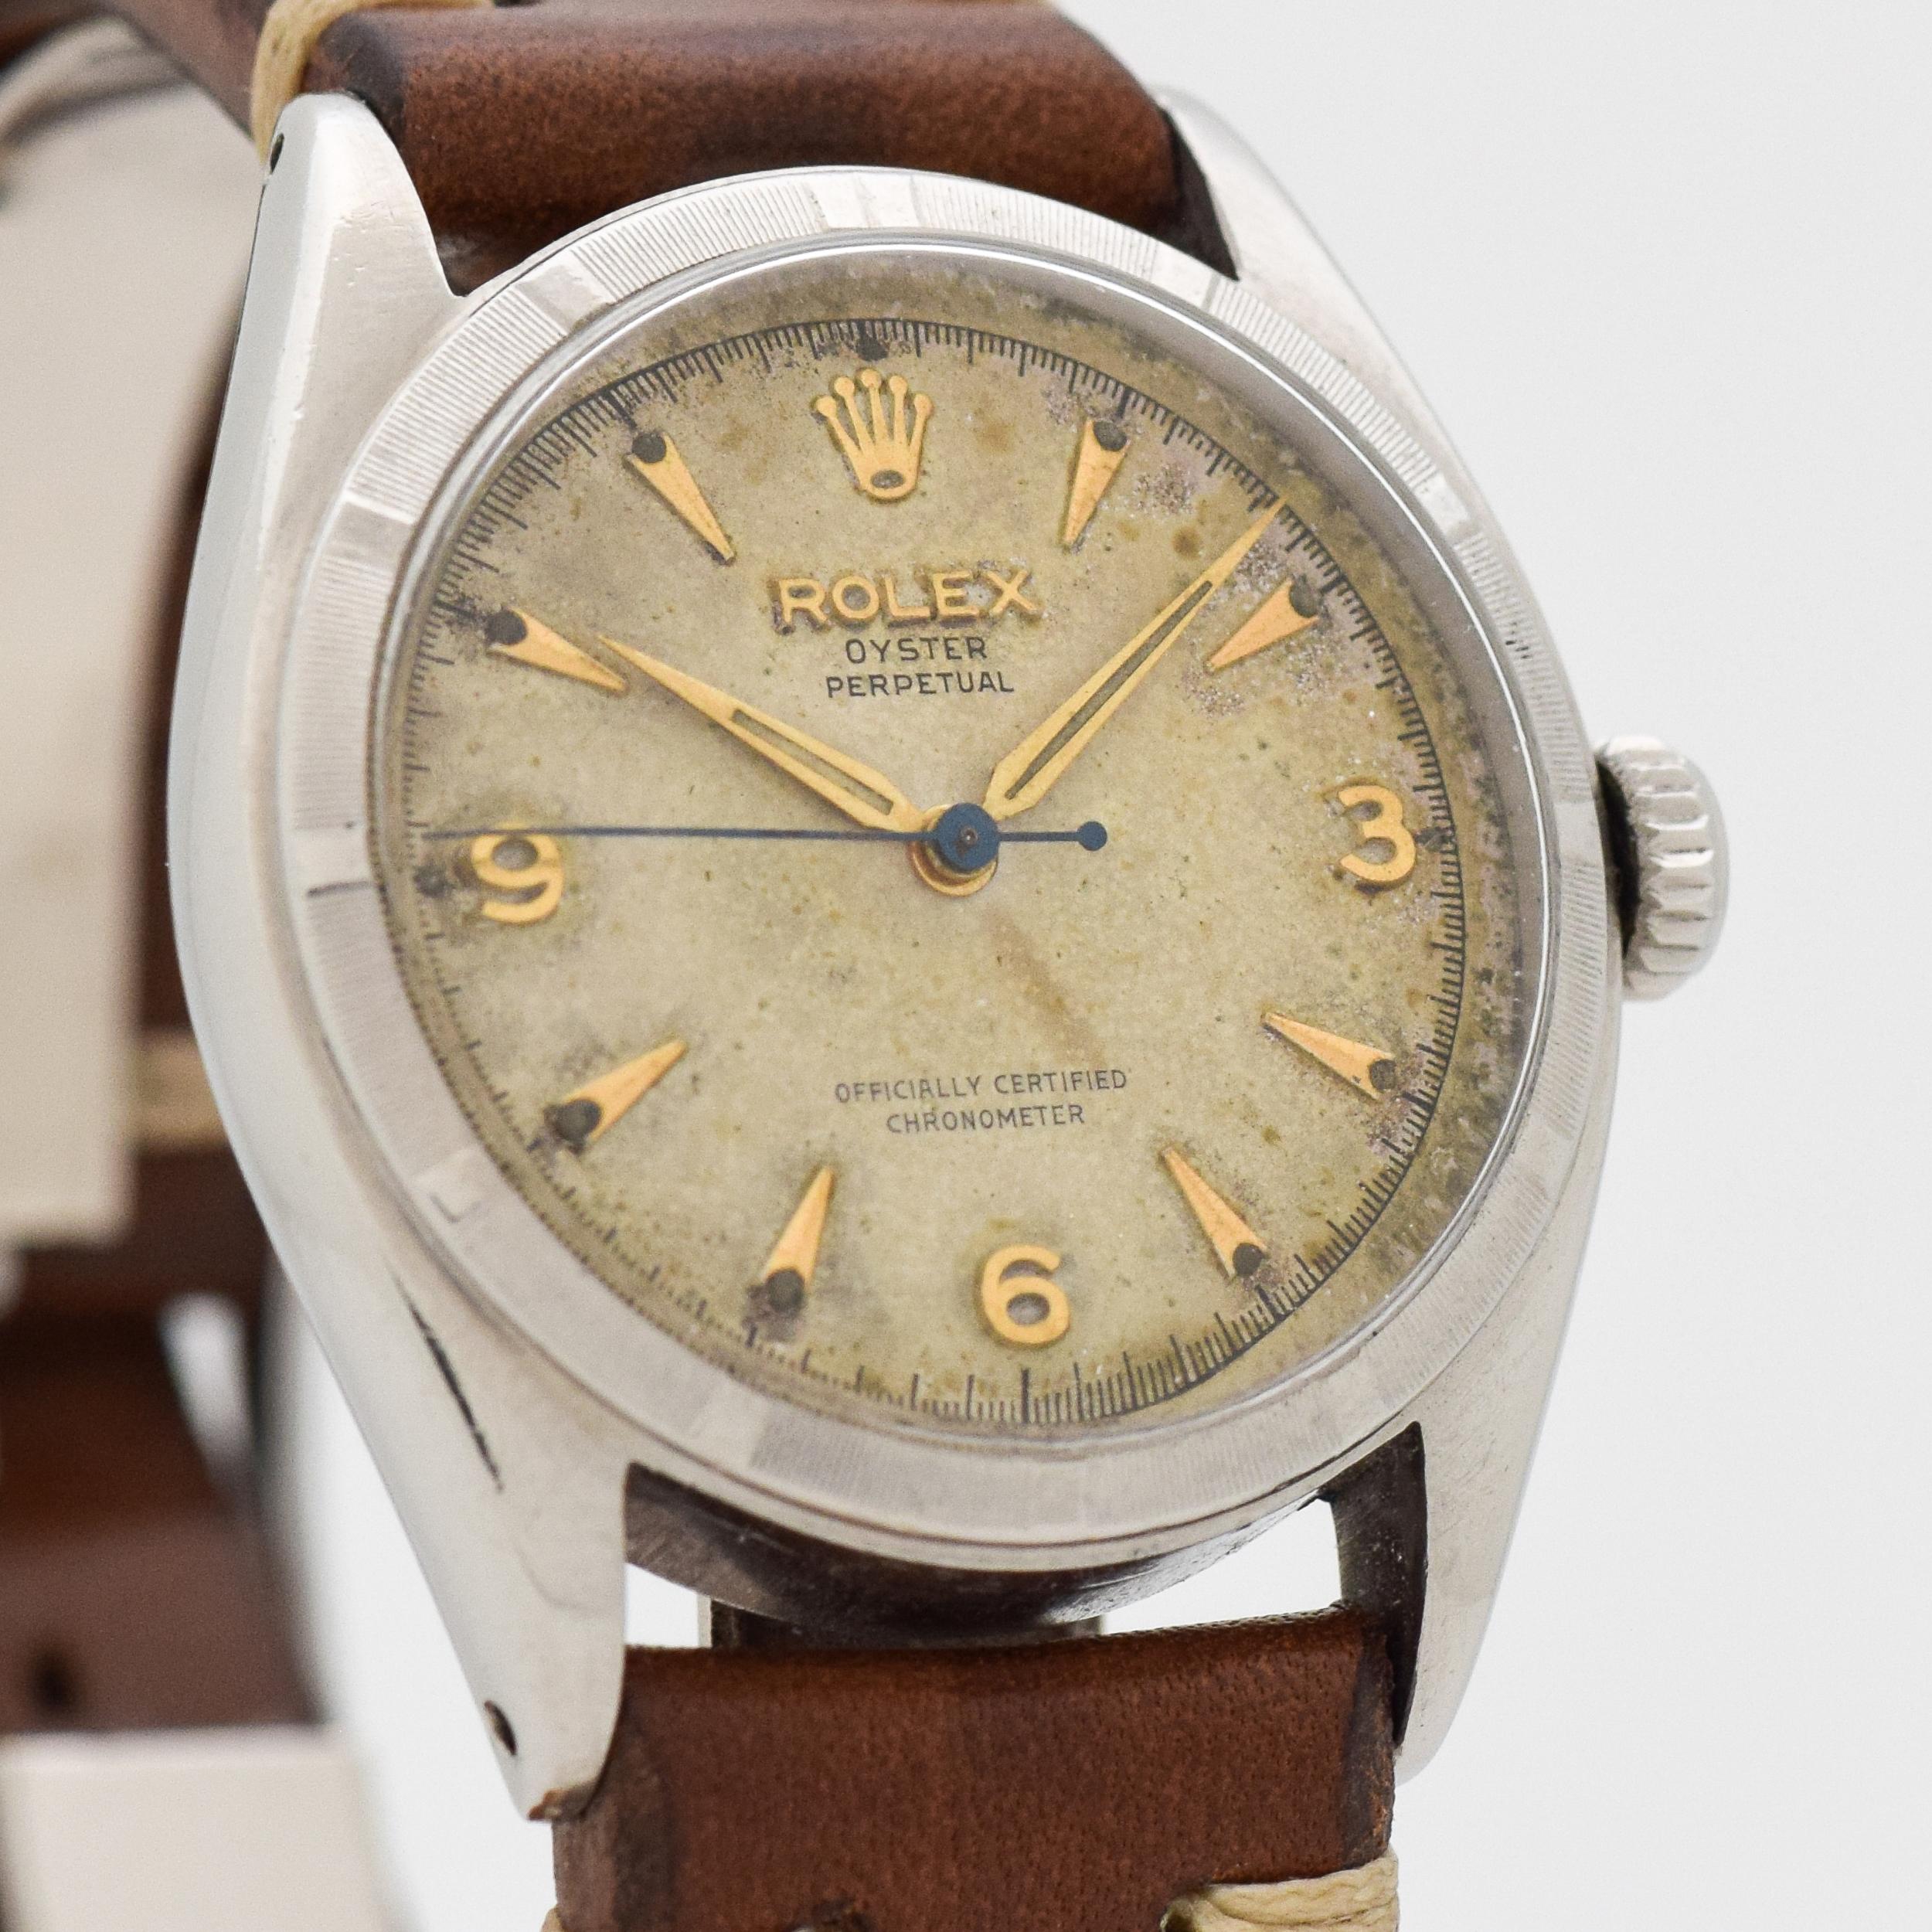 1958 Vintage Rolex Oyster Perpetual Ref. 6085 Stainless Steel watch with Machined Bezel with Original Silver Dial with Applied Gold Color Arabic 3, 6, and 9 with Elongated Beveled Arrow Markers. 34mm x 38mm lug to lug (1.34 in. x 1.5 in.) - 17